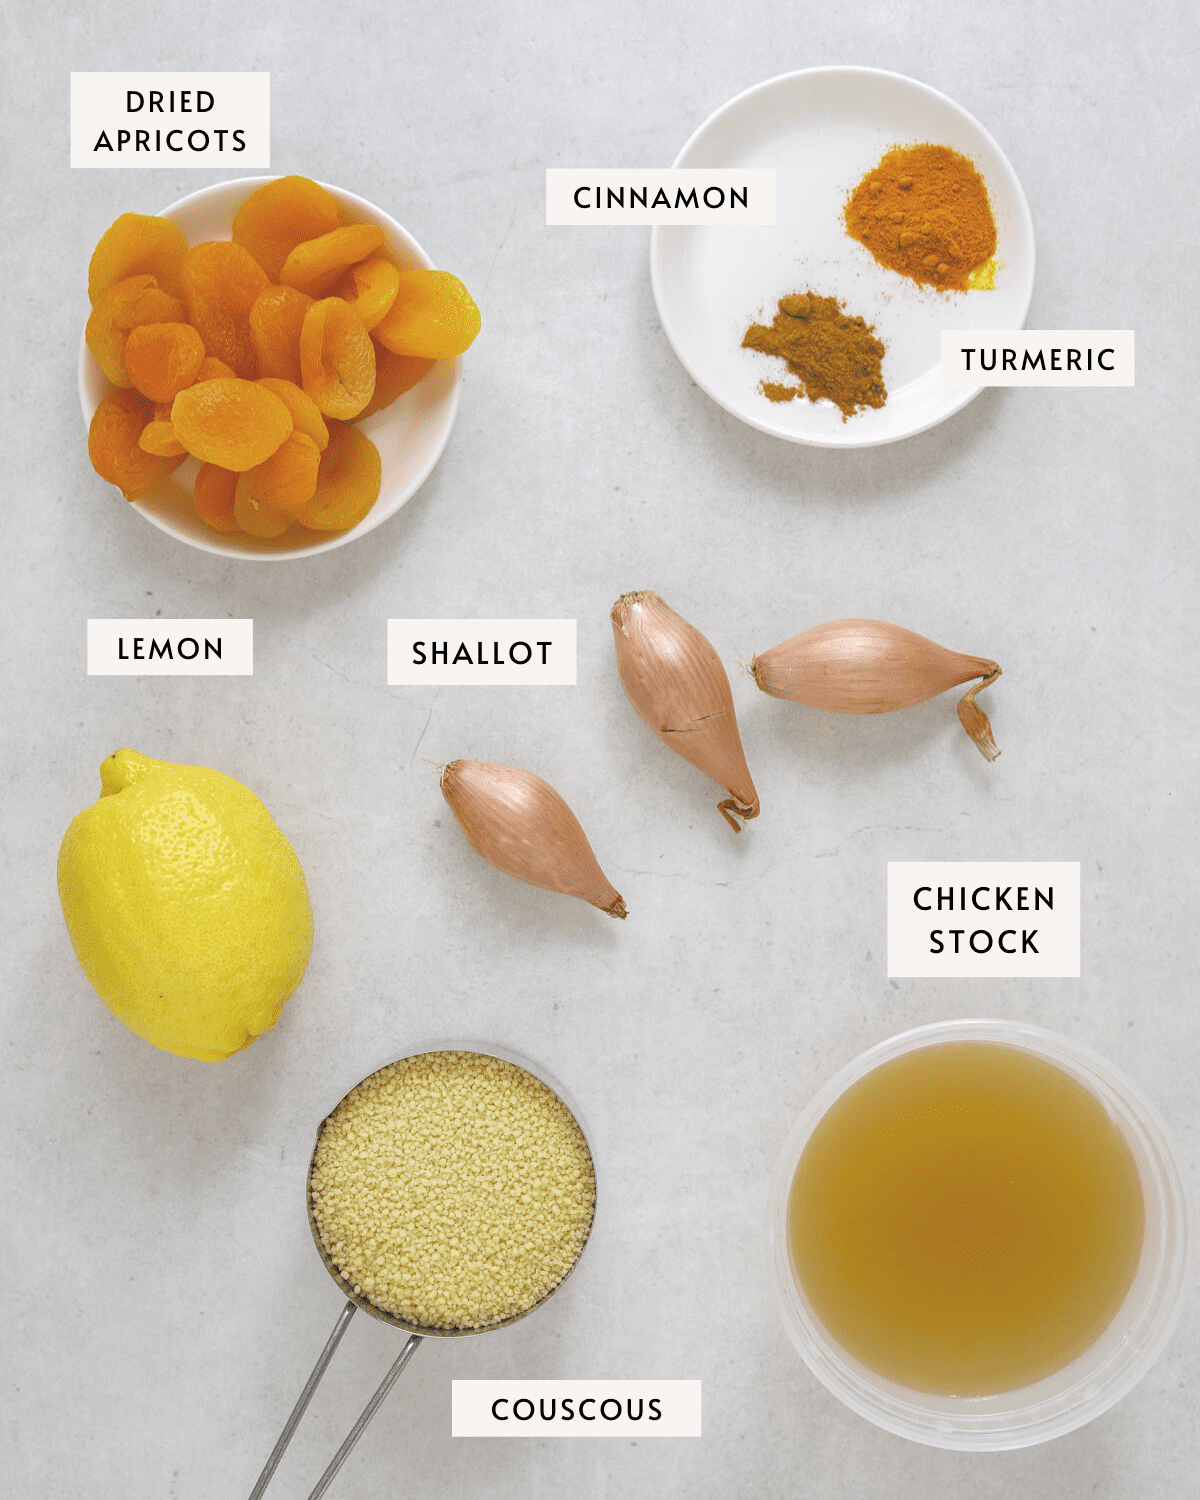 a small white bowl of dried apricots, a white bowl of cinnamon and turmeric, a container of chicken stock, three shallots, a lemon and a measuring cup of couscous